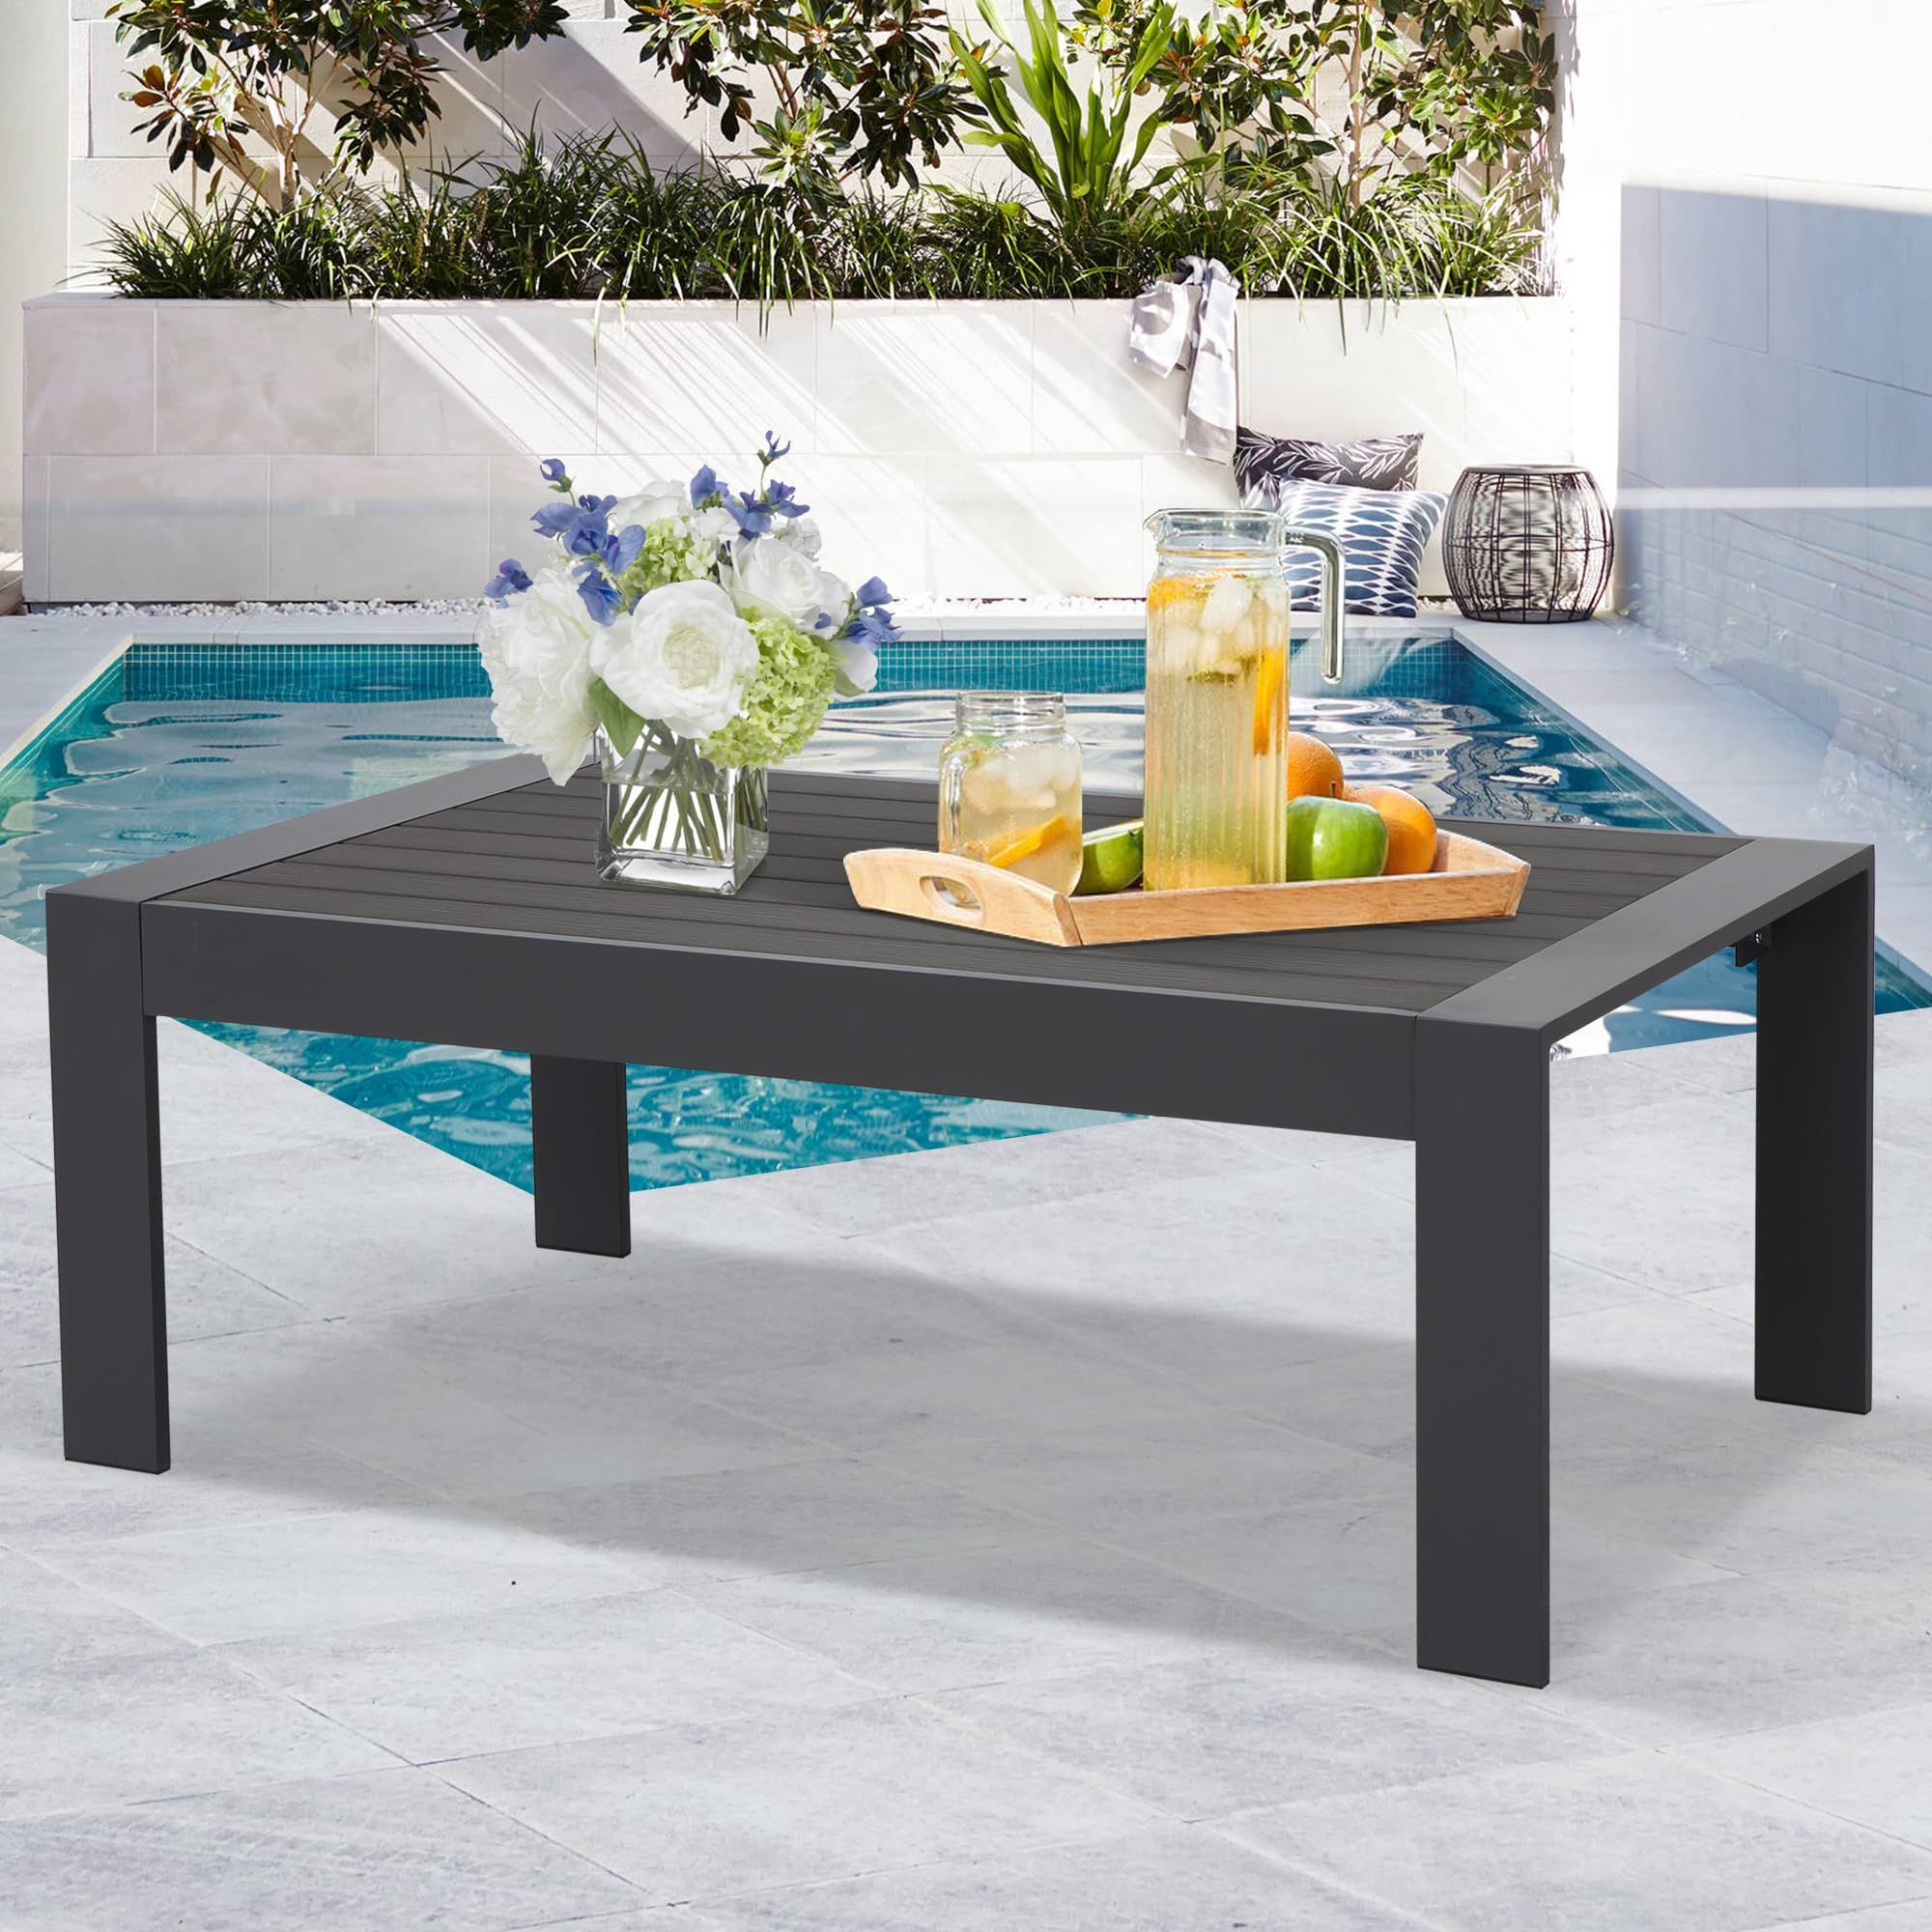 Amazon: Odoor Direct Outdoor Coffee Table For Patio, Aluminum Patio  Coffee Table With Imitation Wood, Metal Modern Coffee Table For Balcony,  Backyard, Porch, Dark Grey : Patio, Lawn & Garden Pertaining To Well Known Modern Outdoor Patio Coffee Tables (Photo 4 of 10)